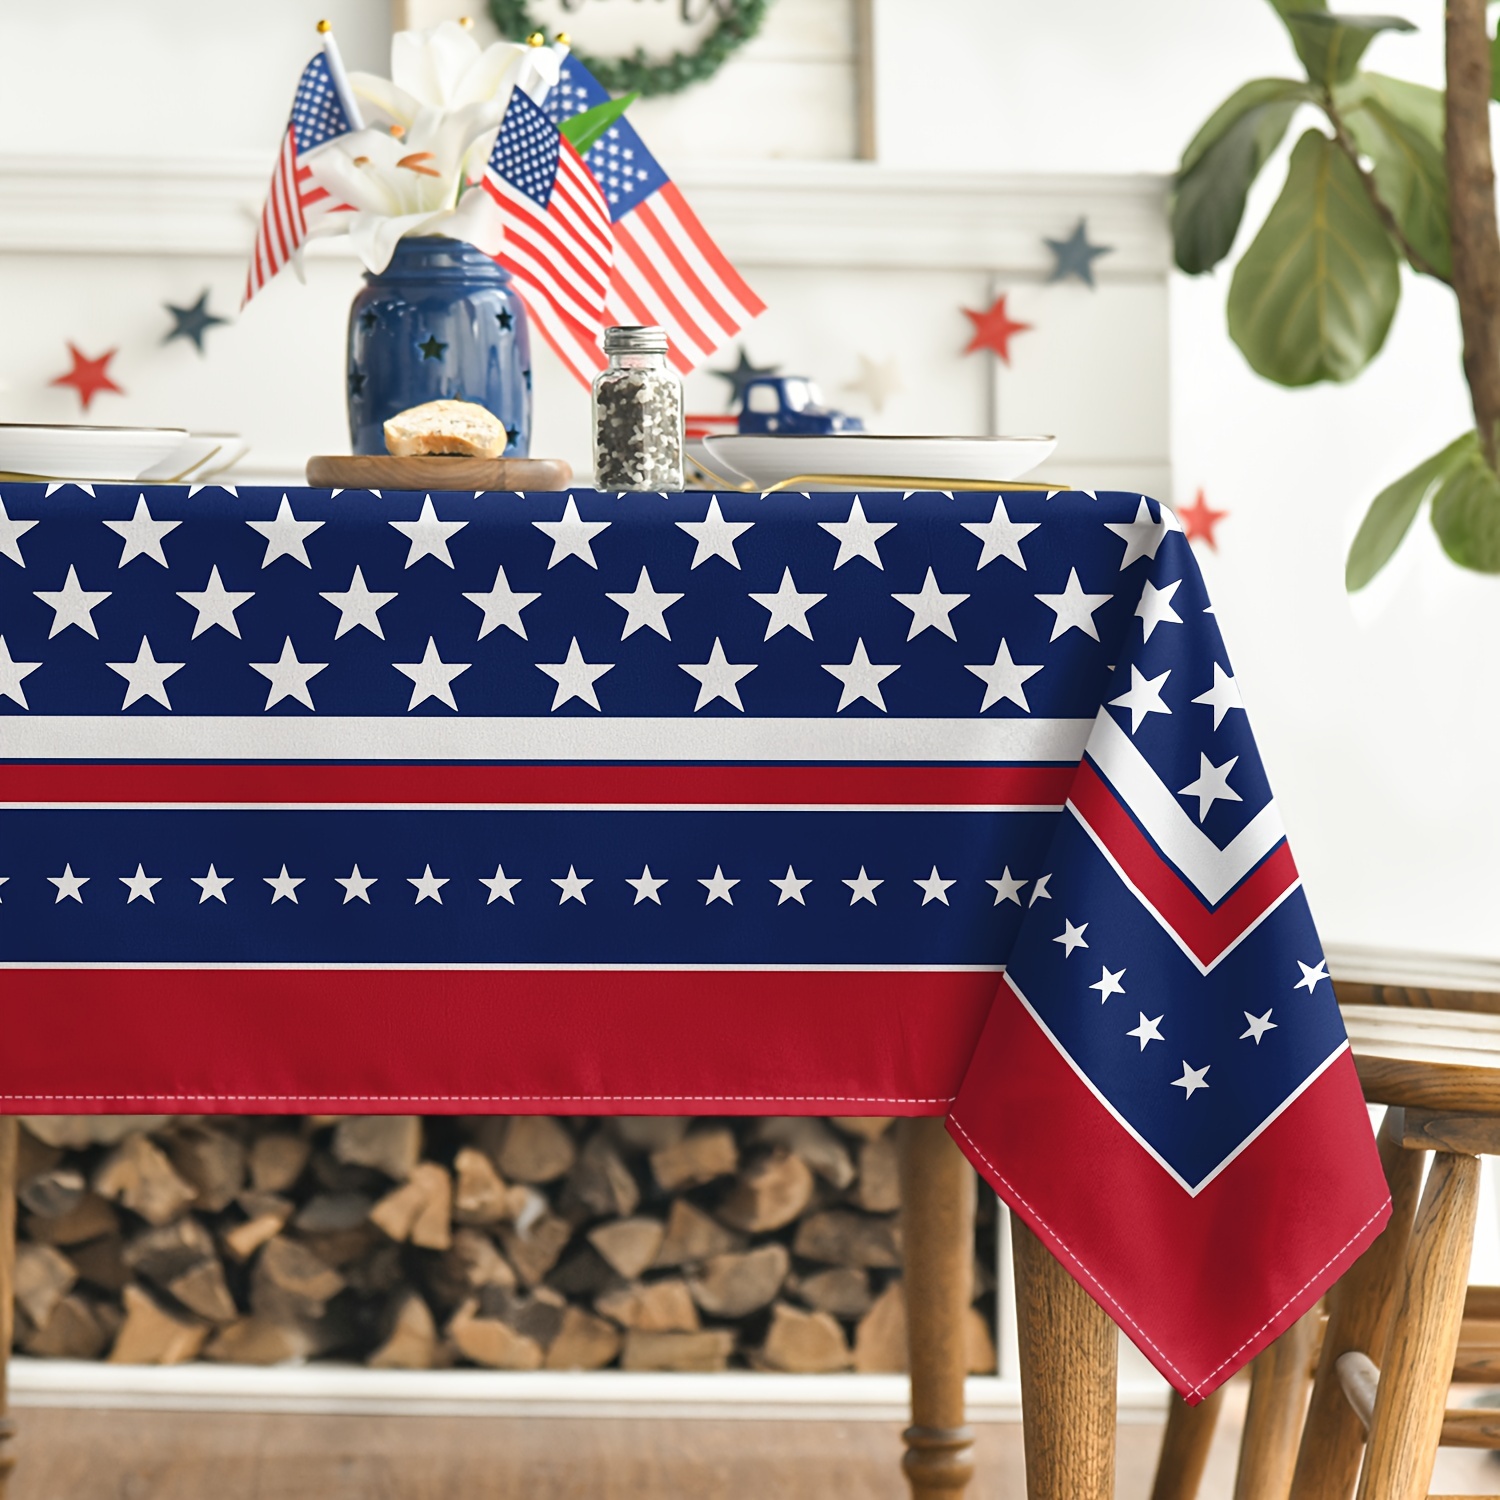 

Sm:)e 4th Of July Tablecloth 60x84 Inch, Patriotic Memorial Day Independence Day American Flag Table Cover For Party Picnic Dinner Decor